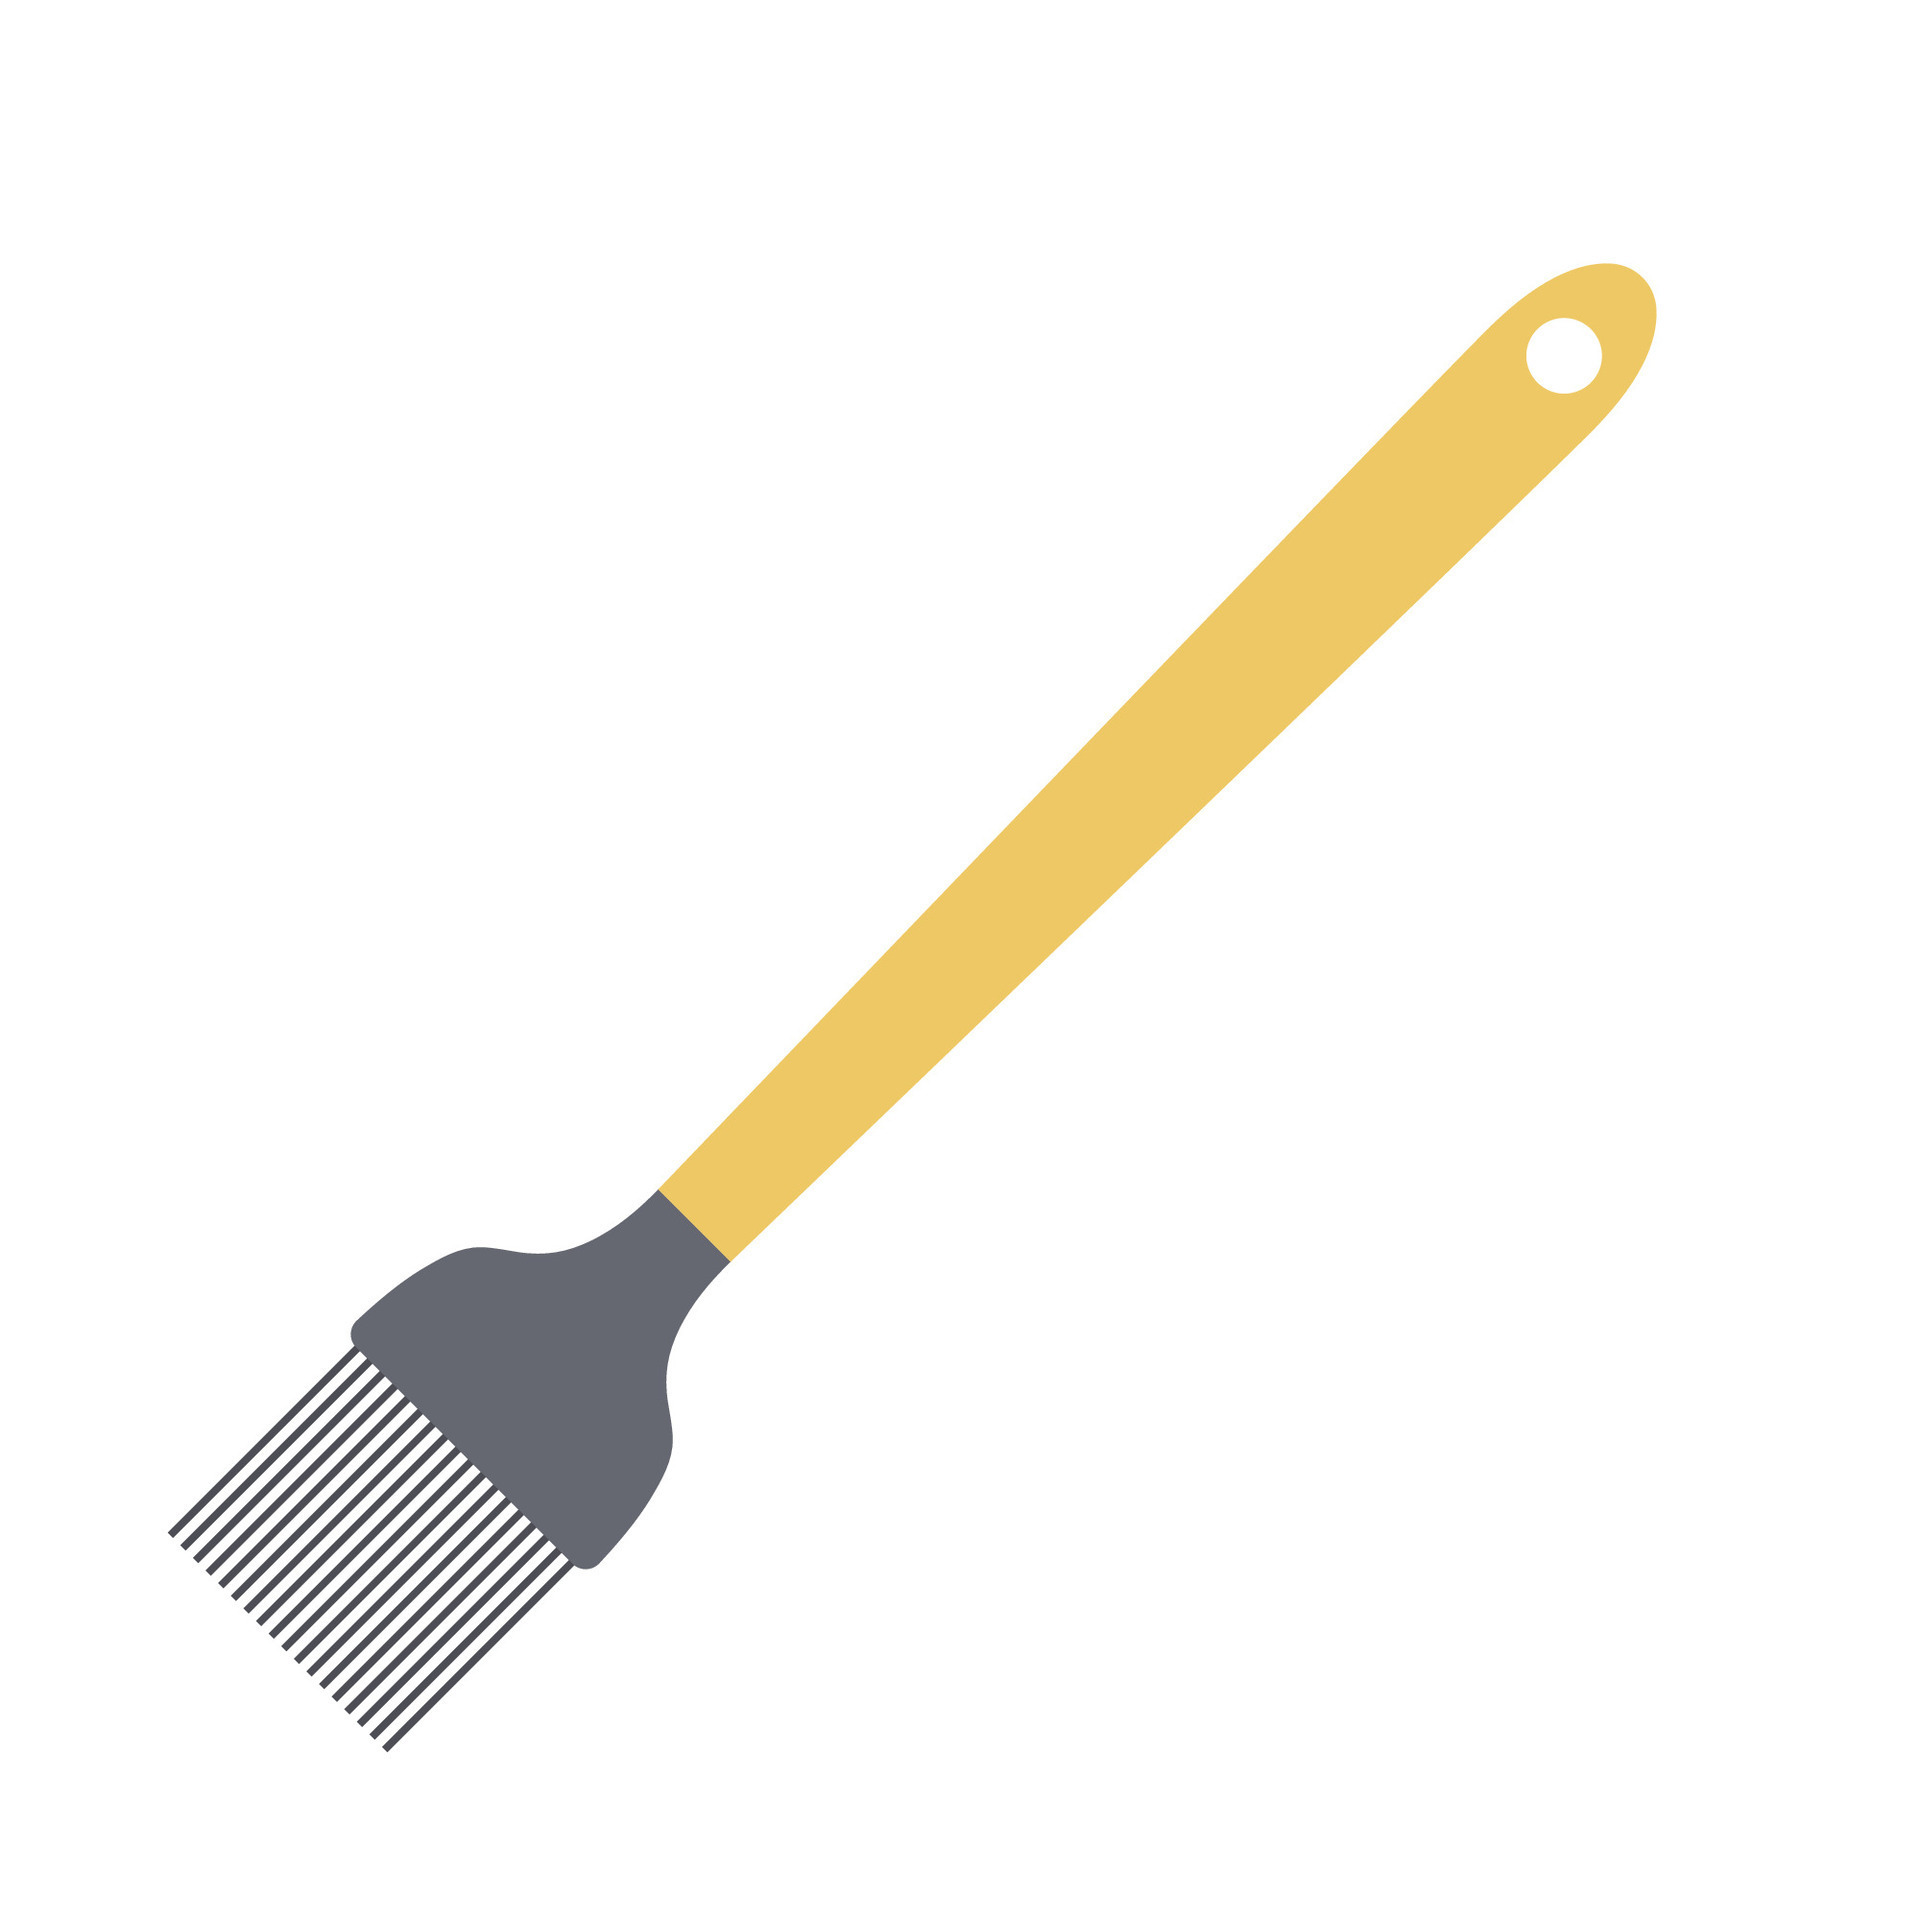 https://static.vecteezy.com/system/resources/previews/027/618/244/original/pastry-brush-flat-illustration-clean-icon-design-element-on-isolated-white-background-vector.jpg